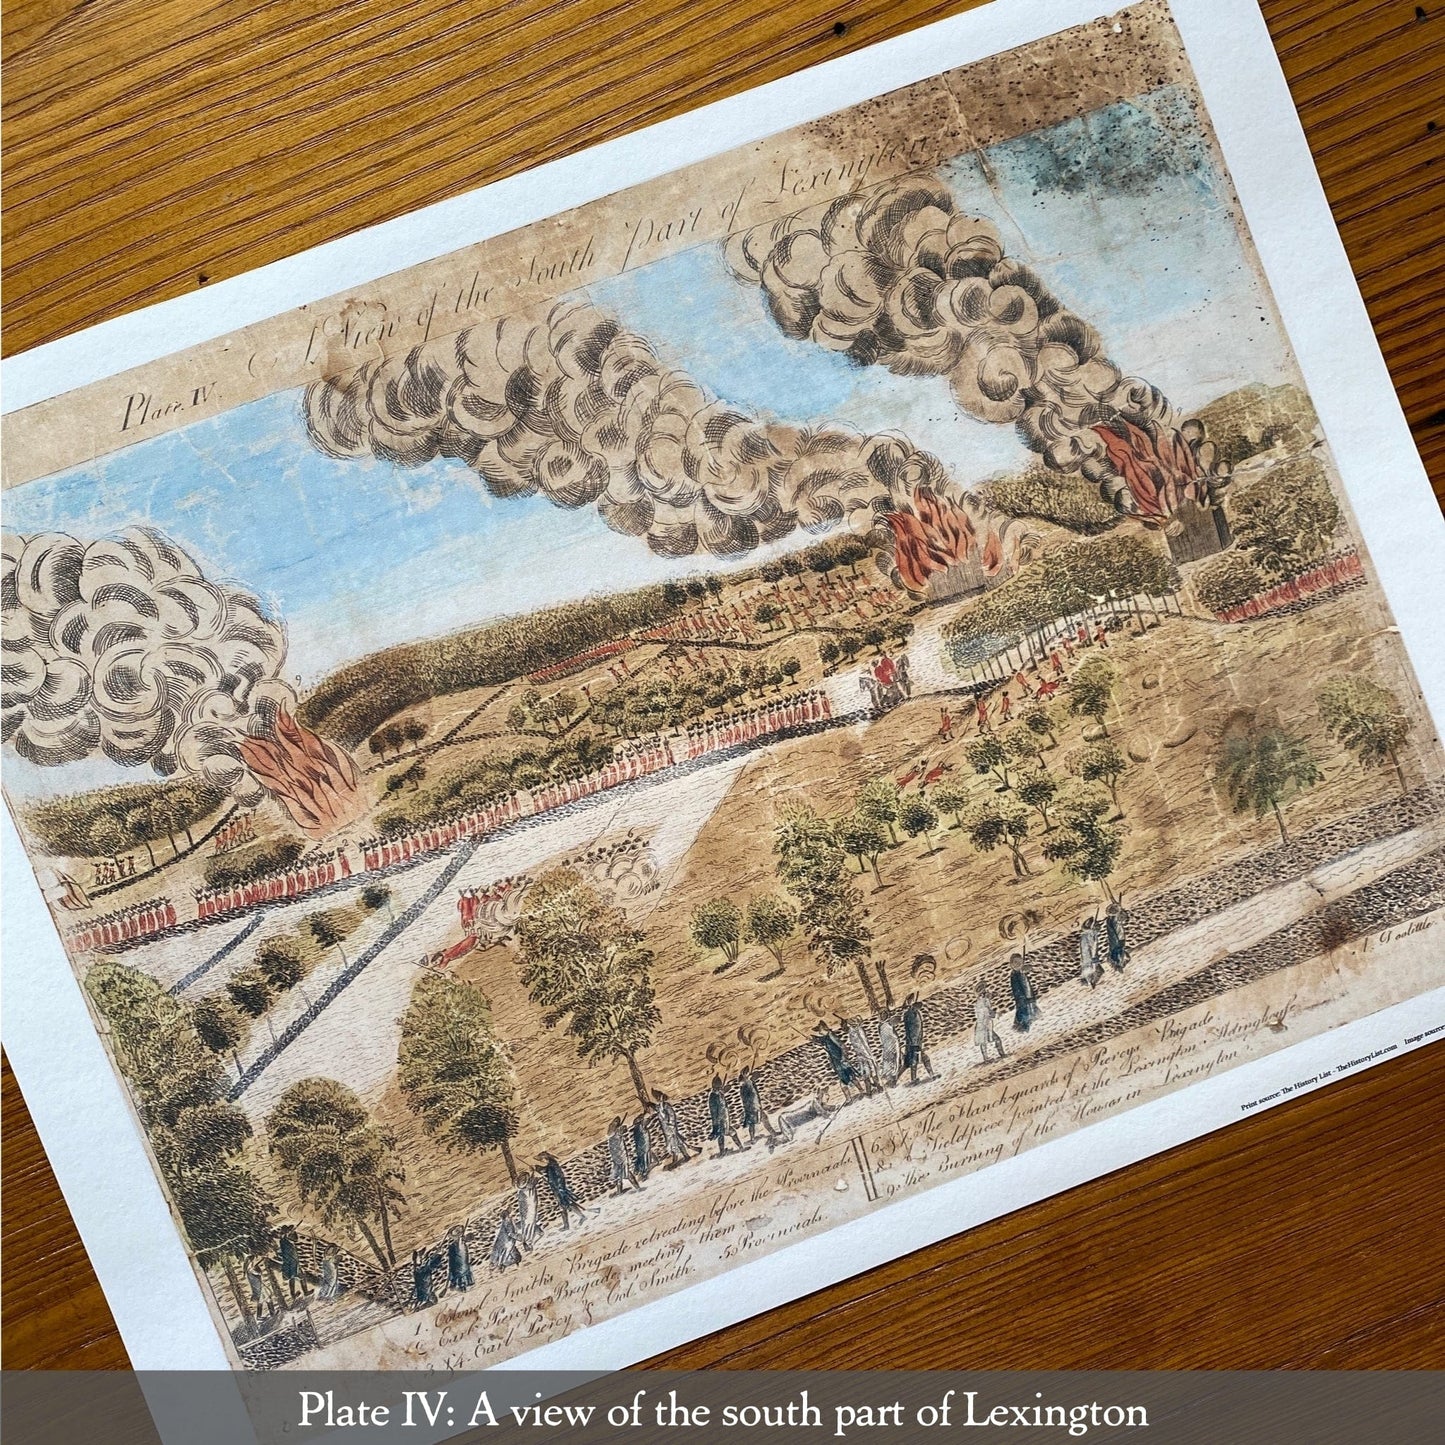 Plate 4: A view of the south part of Lexington - "The Doolittle Engravings of the Battle of Lexington and Concord" Archival Print from the history list store